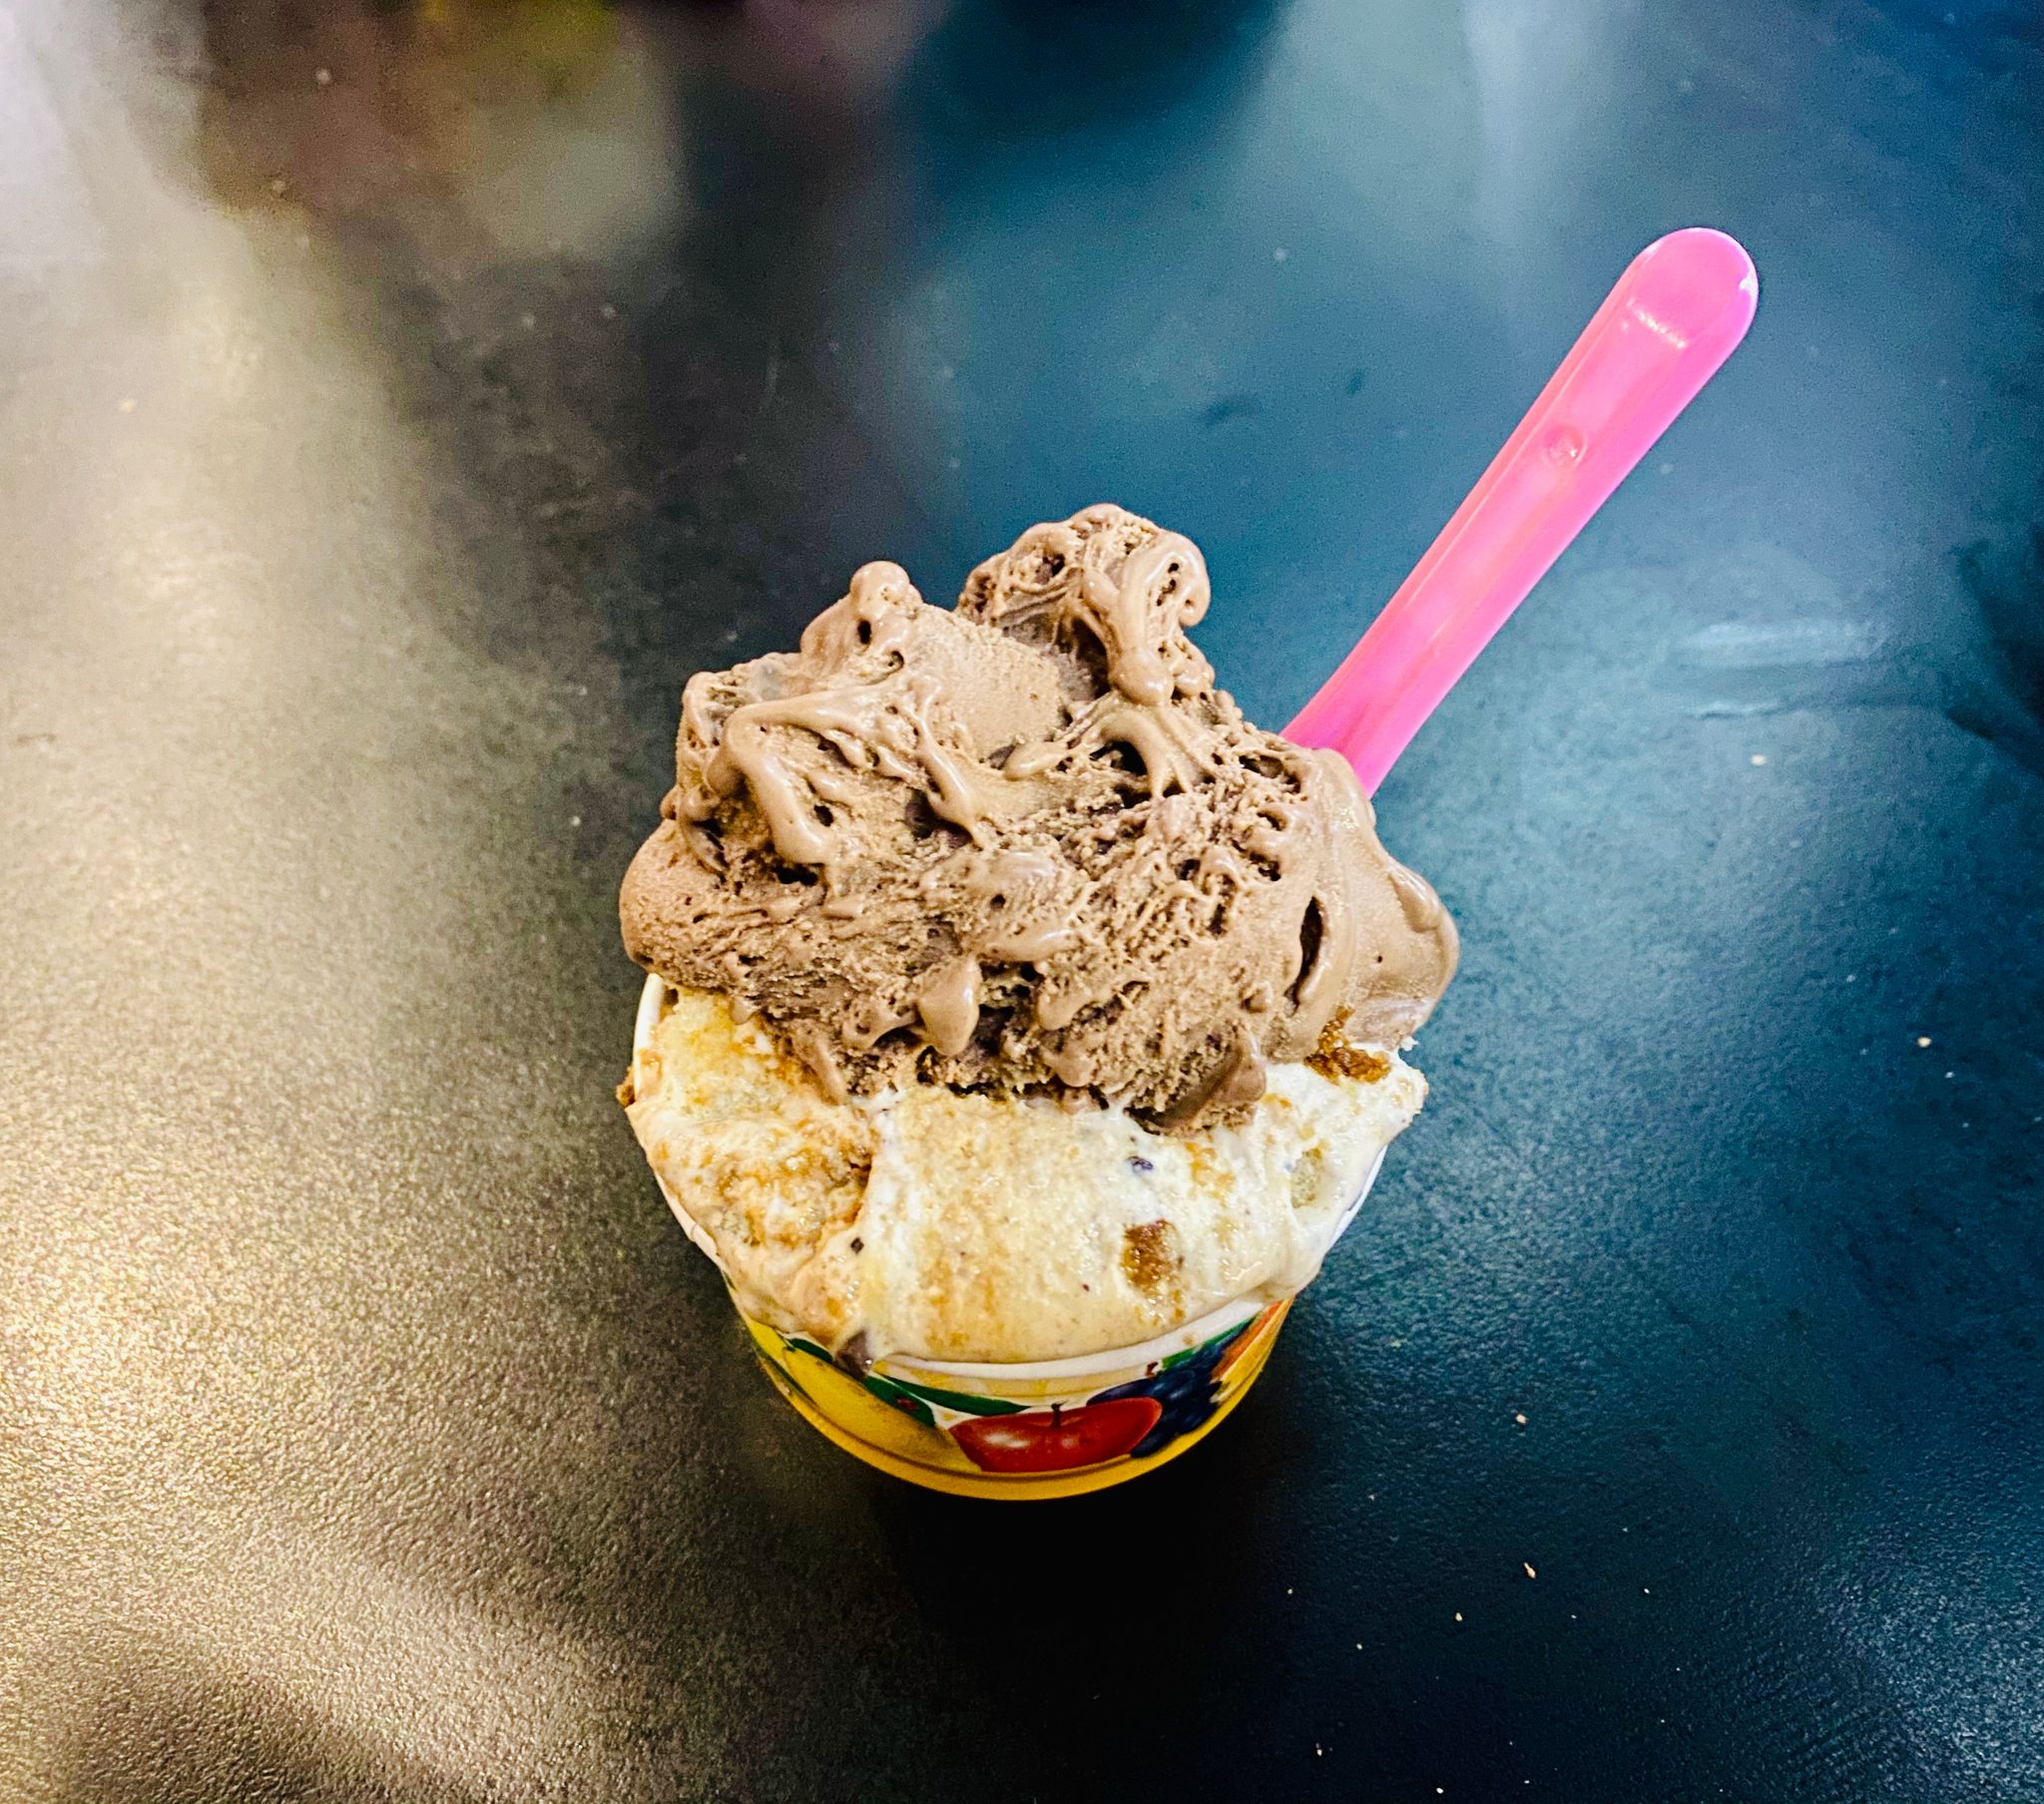 A photo of gelato in a small cup.